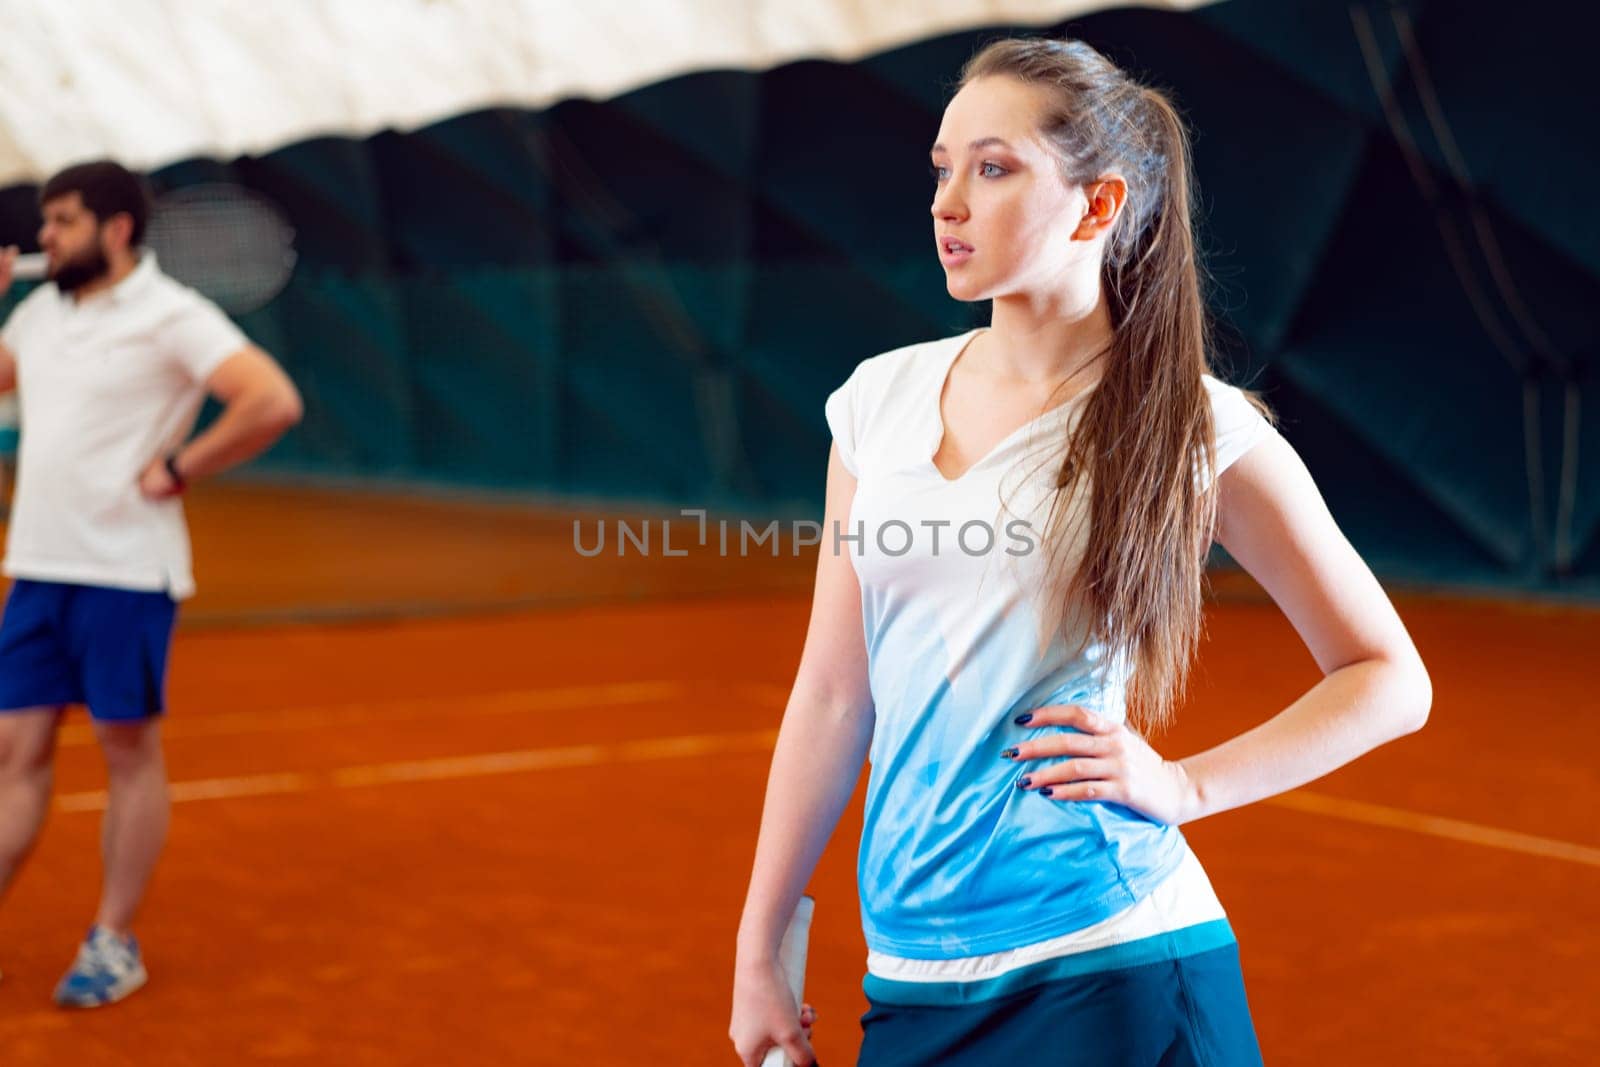 Young woman playing tennis at indoor tennis court by Fabrikasimf